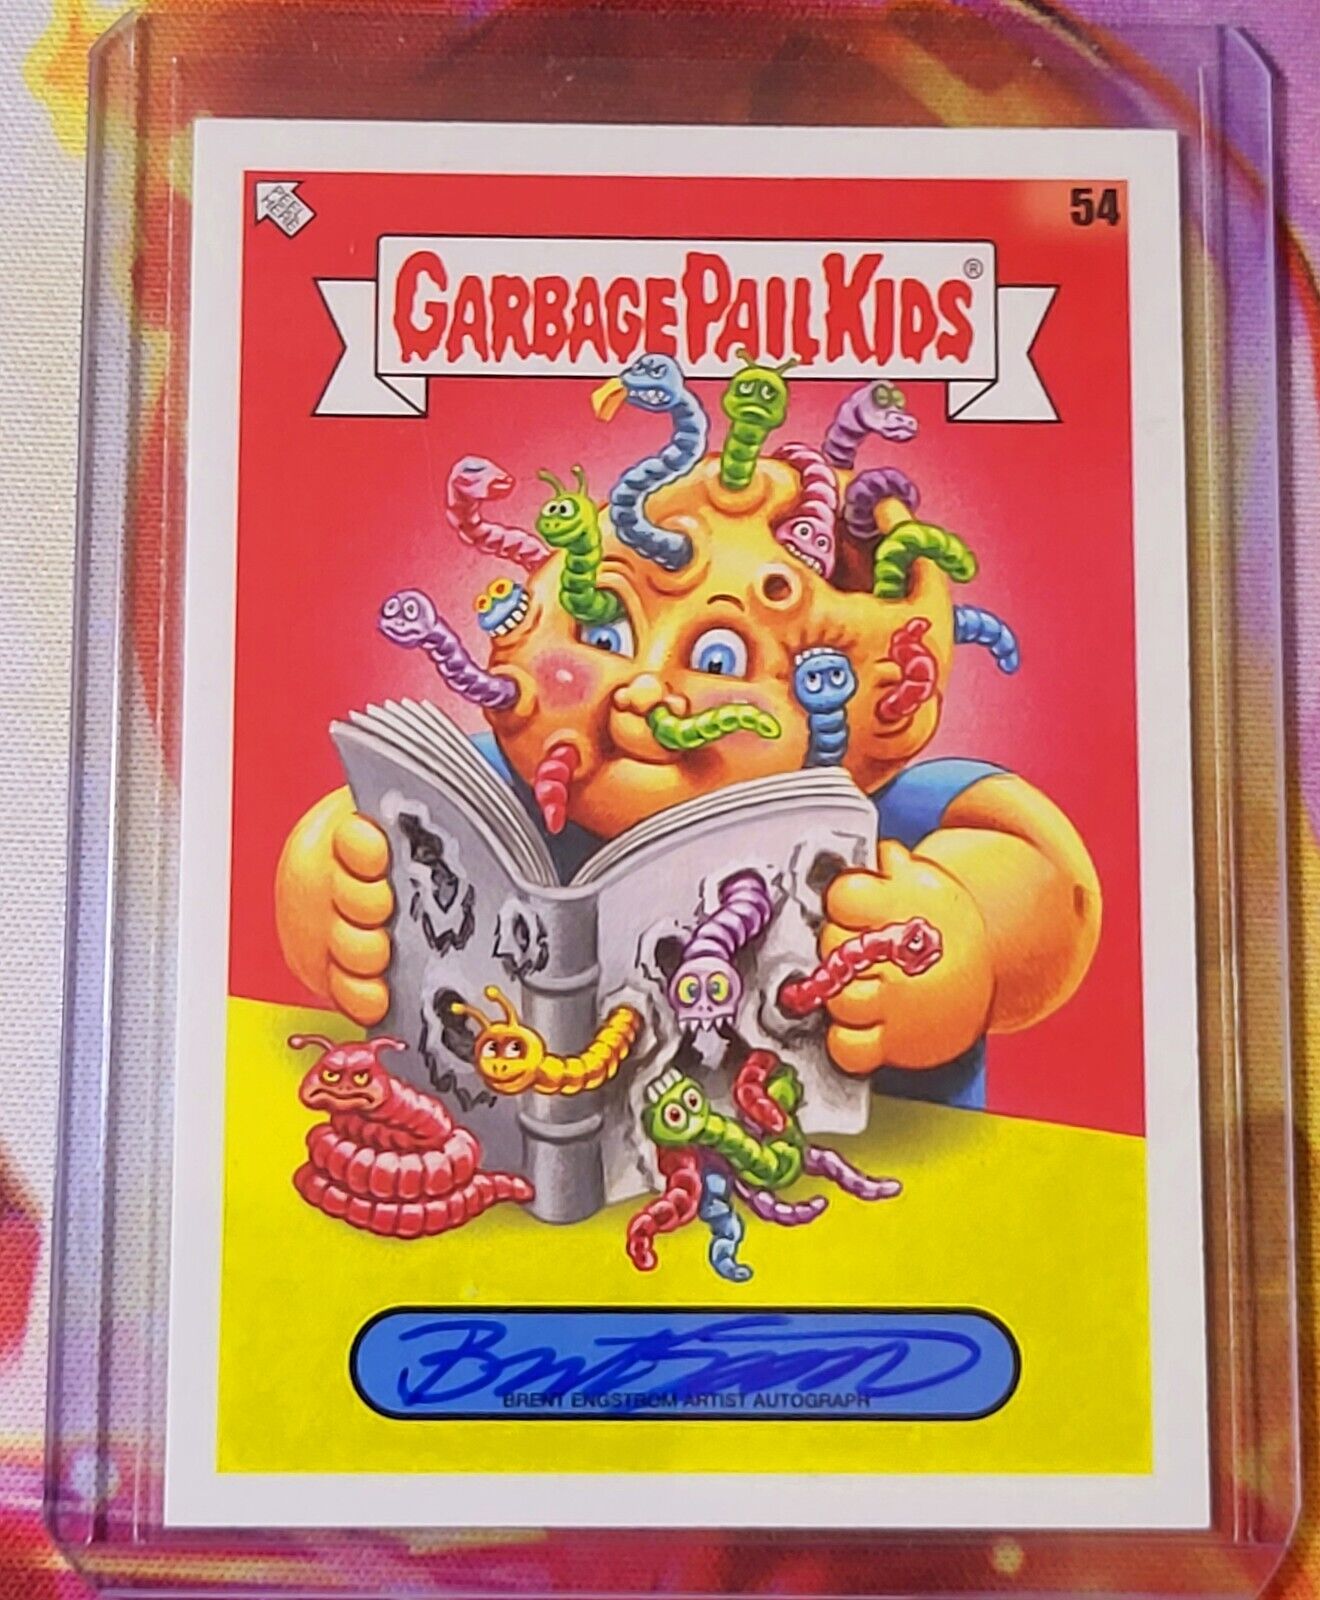 Garbage Pail Kids 2022 Bookworms 54 Brent Engstrom Auto